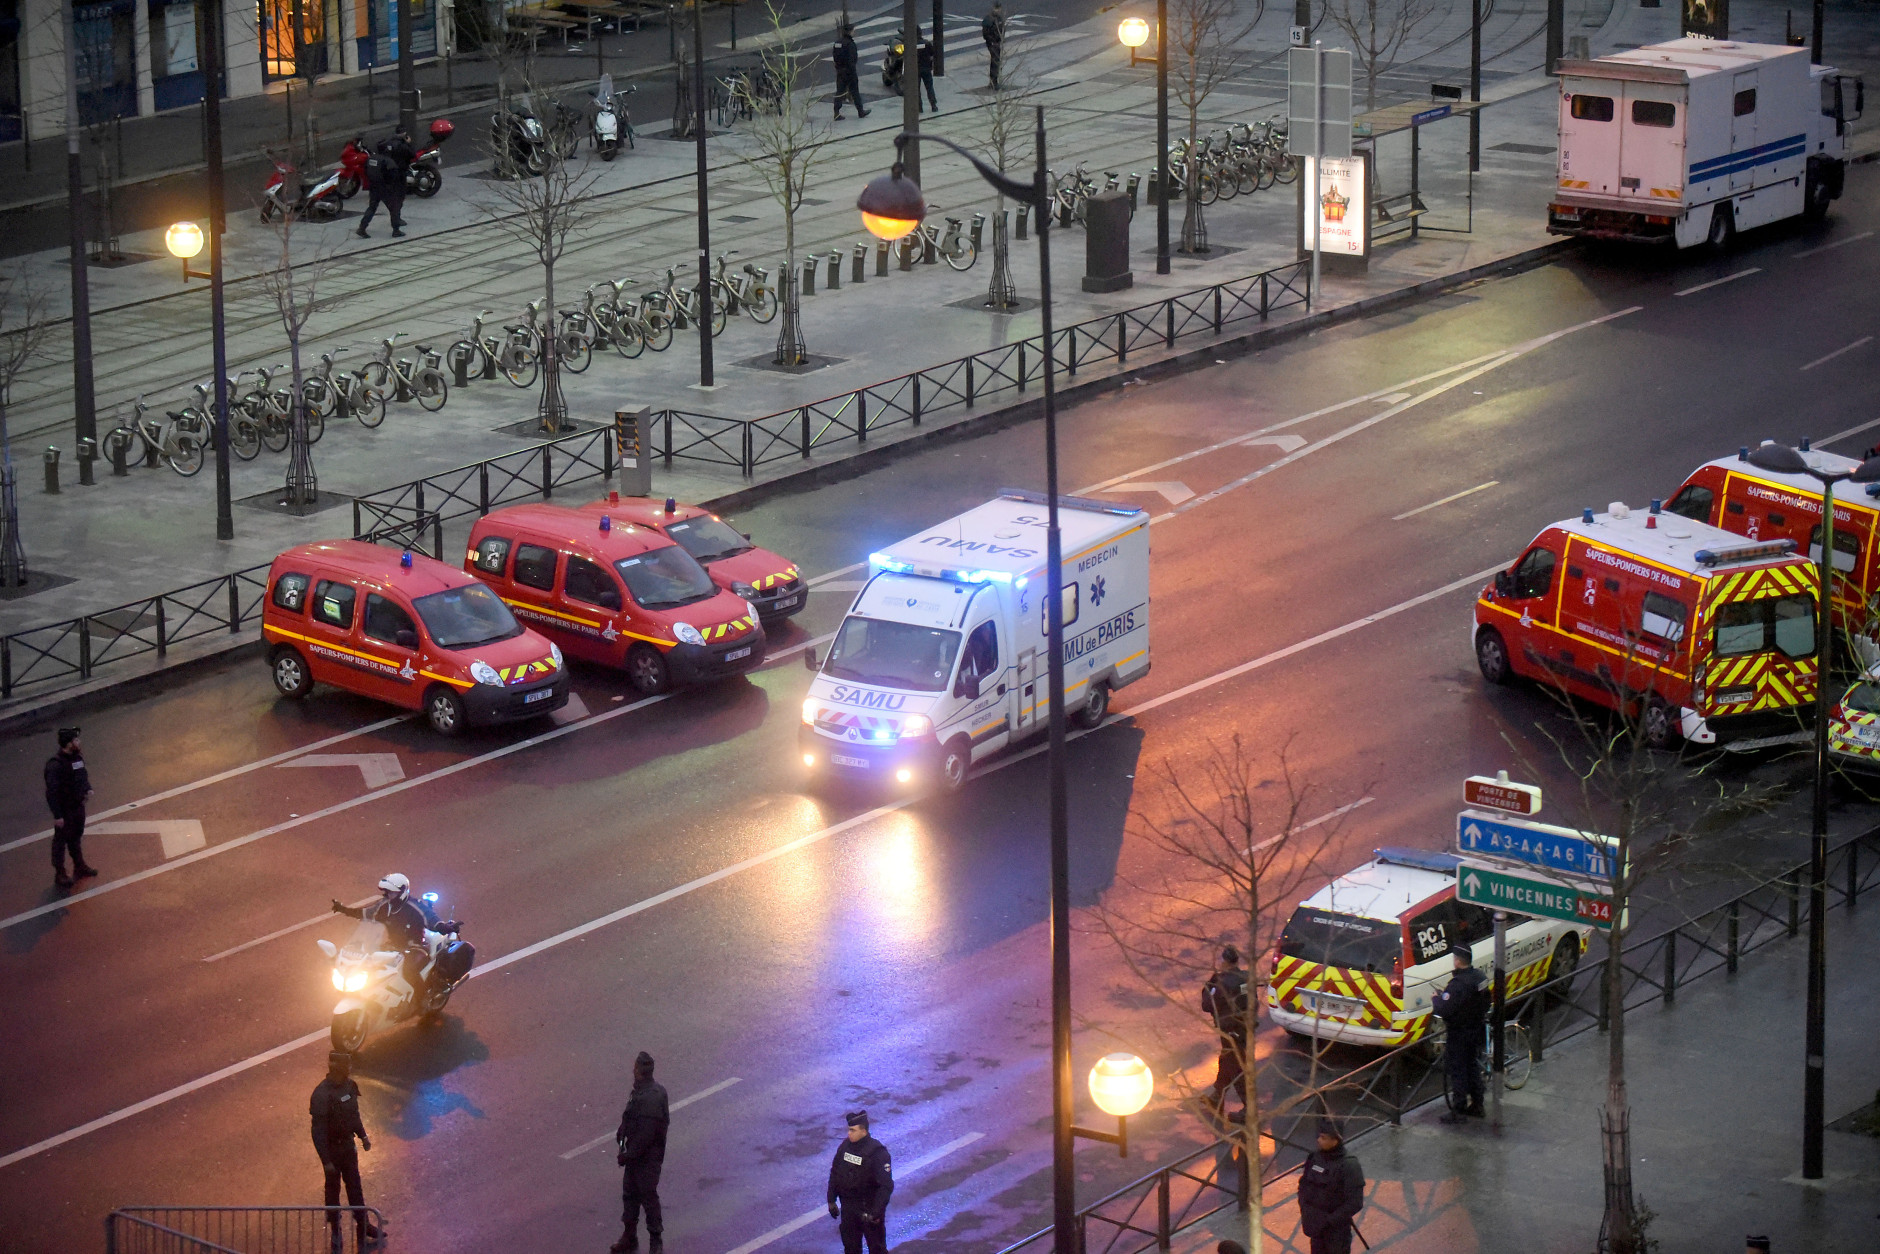 French emergency doctors evacuate injured hostages during a hostage situation at Port de Vincennes on January 9, 2015 in Paris, France. According to reports at least five people were taken hostage in a kosher deli in the Port de Vincennes area of Paris. A huge manhunt for the two suspected gunmen in Wednesday's deadly attack on Charlie Hebdo magazine has entered its third day. (Photo by Antoine Antoniol/Getty Images)